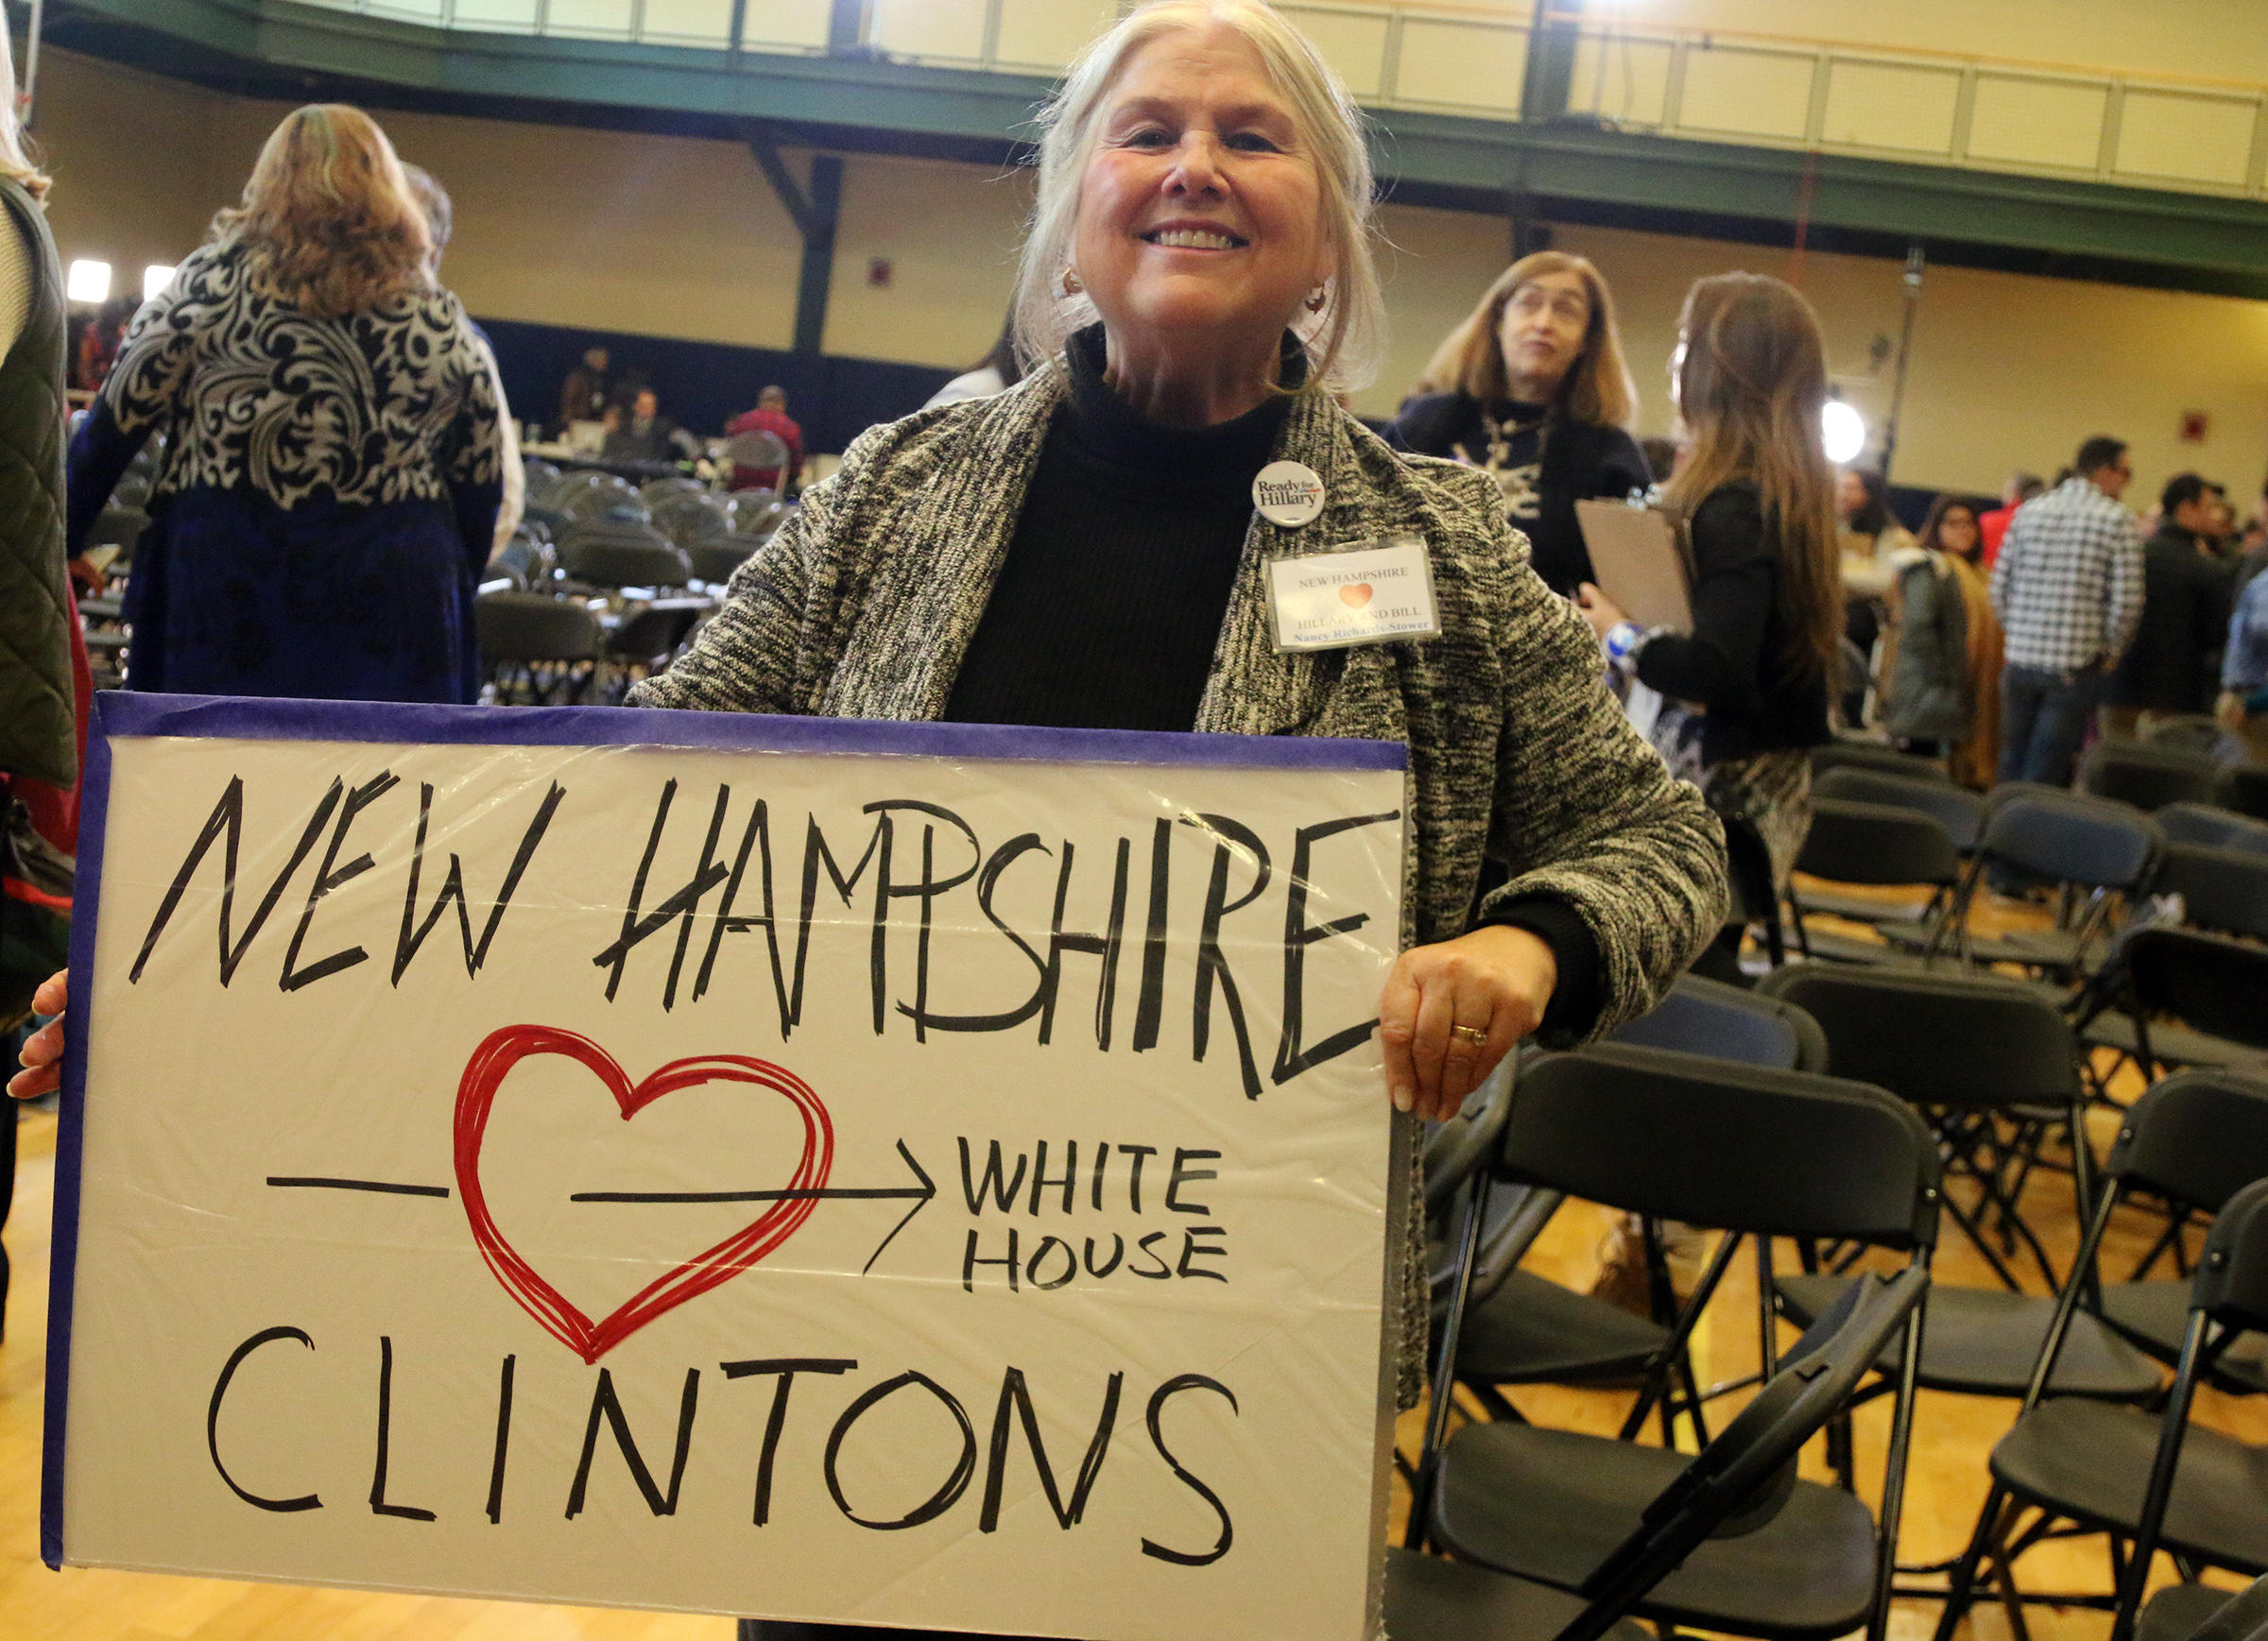 Bill Still Draws a Crowd in N.H., But Hillary's Supporters Focus on Her Credentials ...2400 x 1737